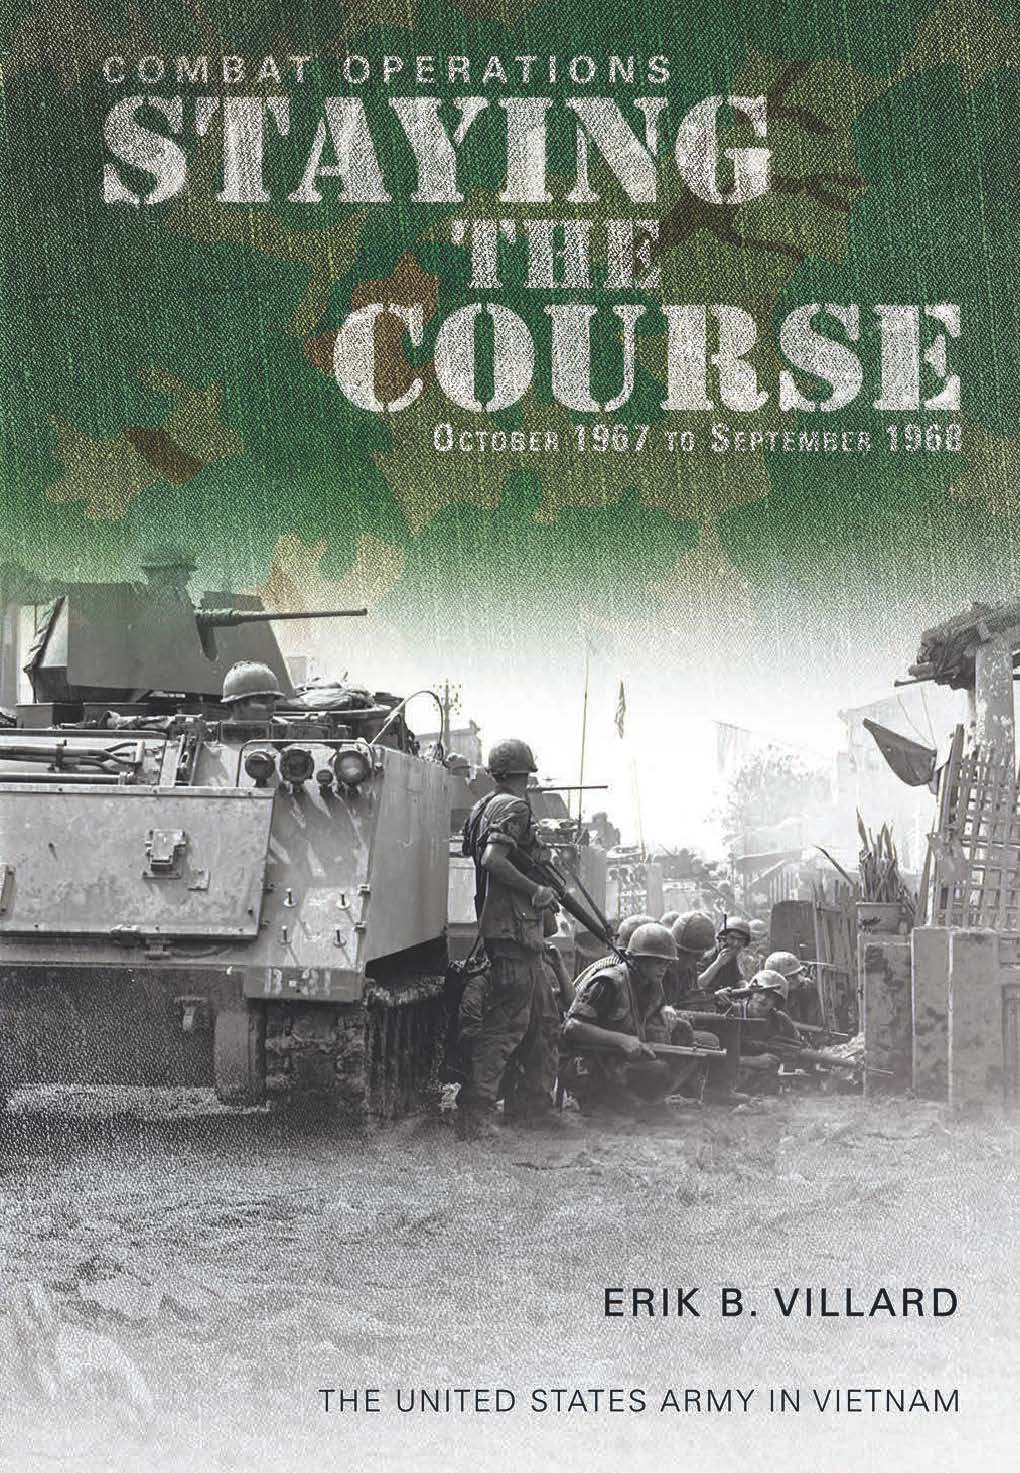 Combat Operations-Staying the Course book cover